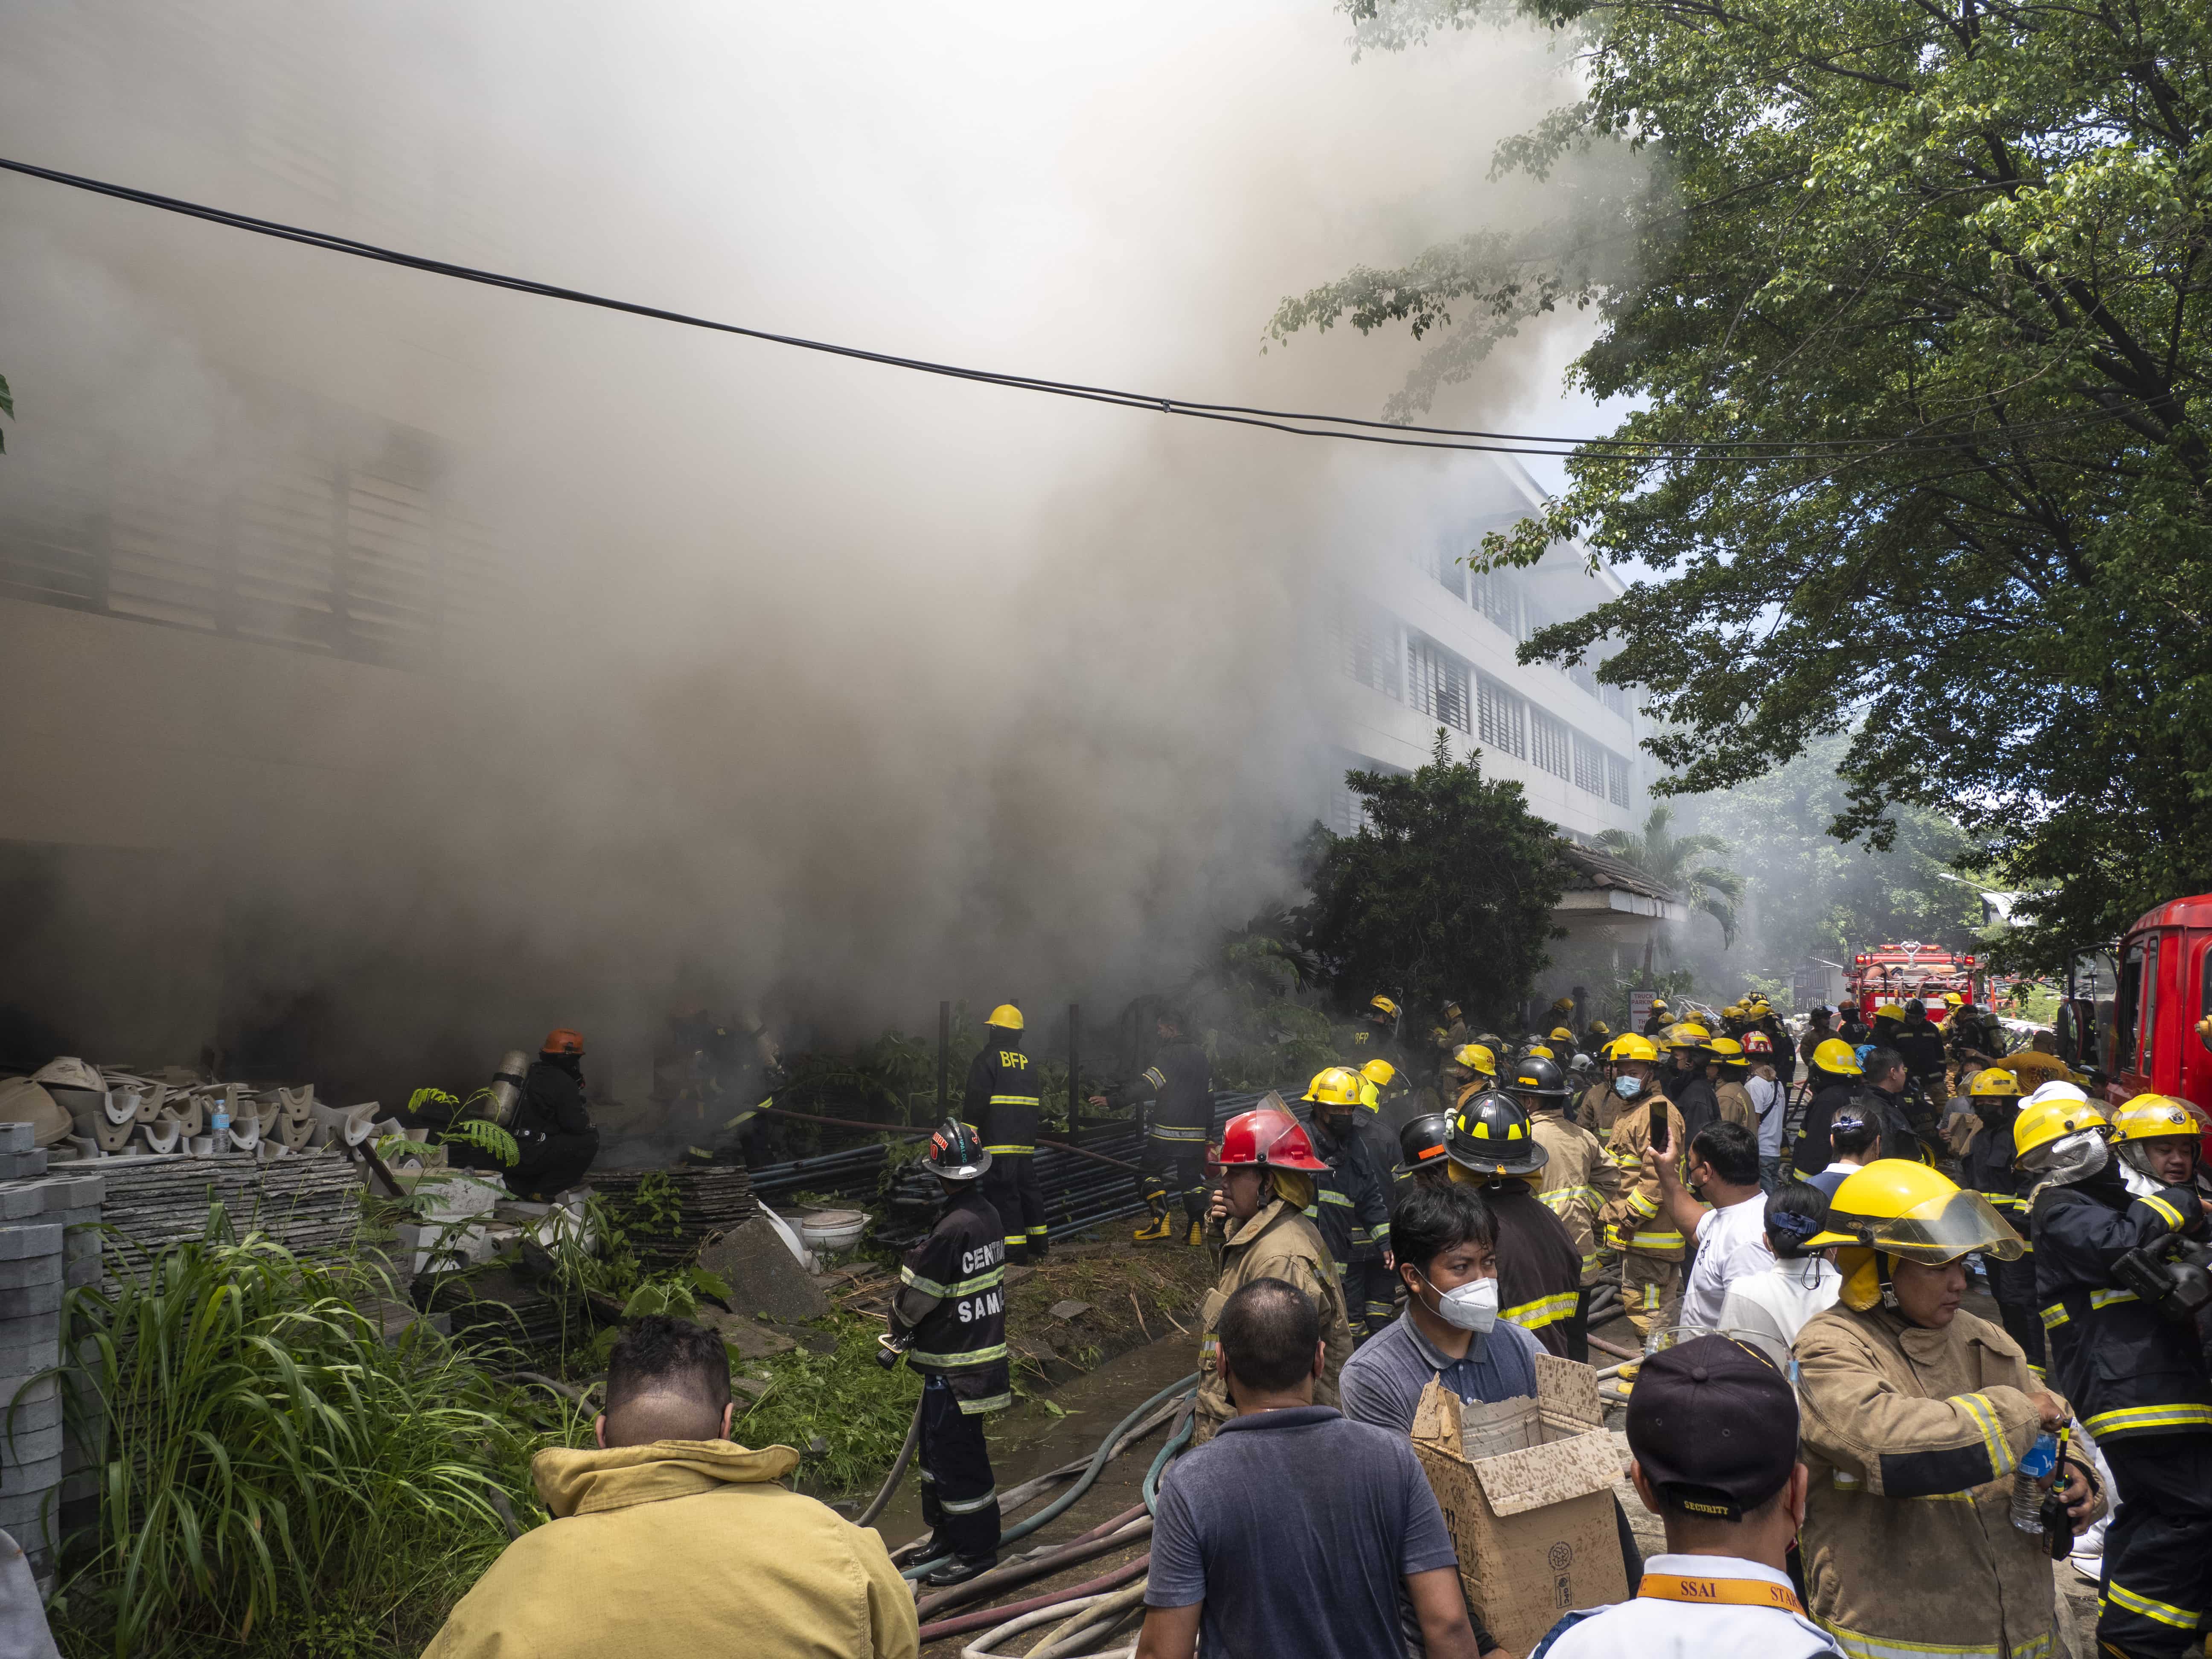 Firefighters and volunteers outside the burning building. 【Photo by Harold Alzaga】